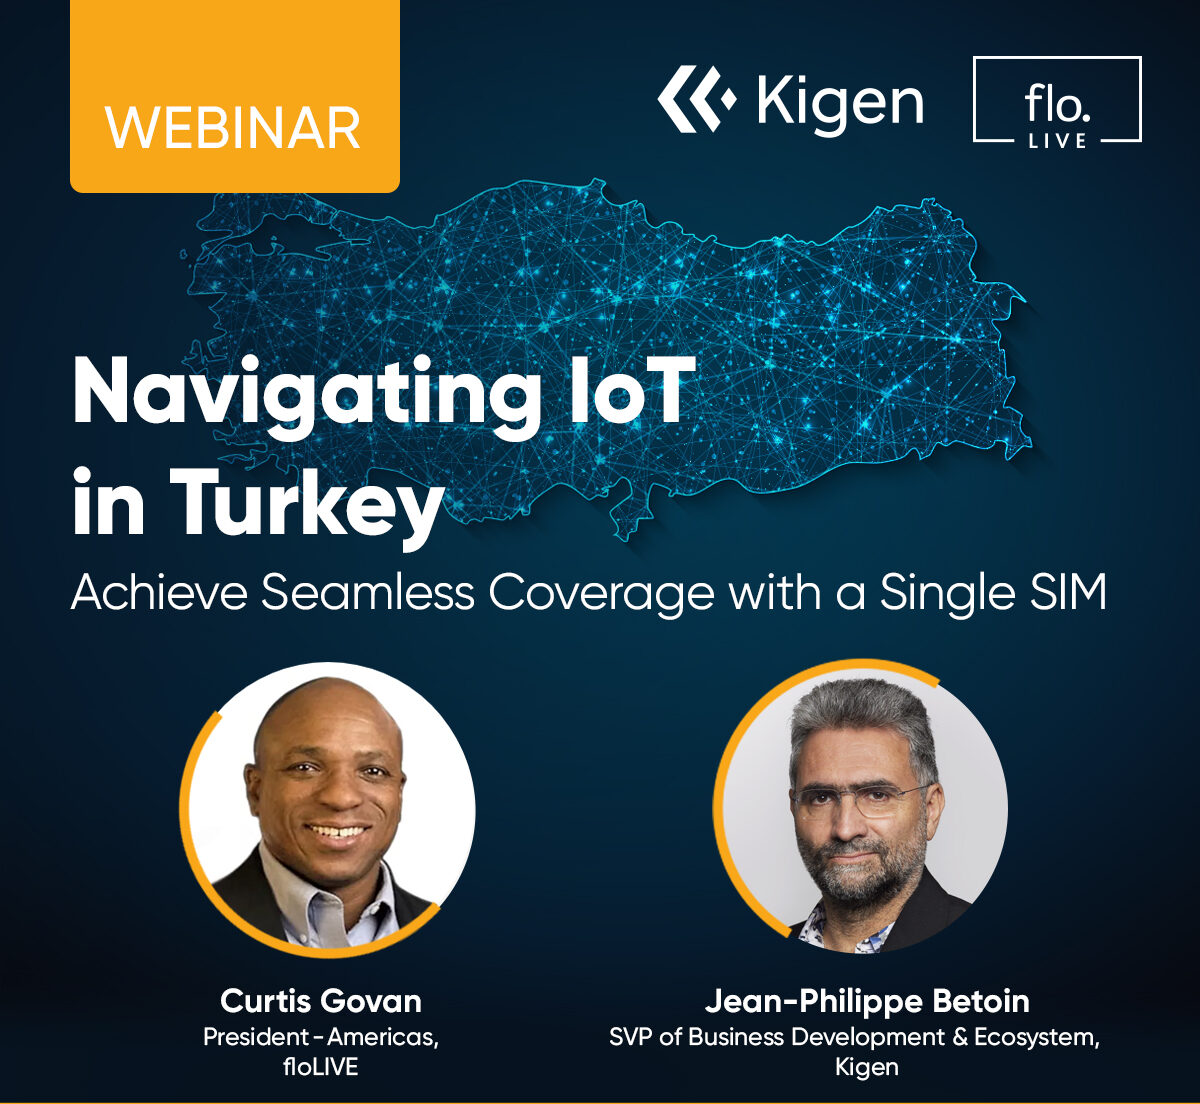 navigating iot connectivity in Turkey. A webinar with jean-philippe betoin from Kigen and Curtis Govan from floLIVE